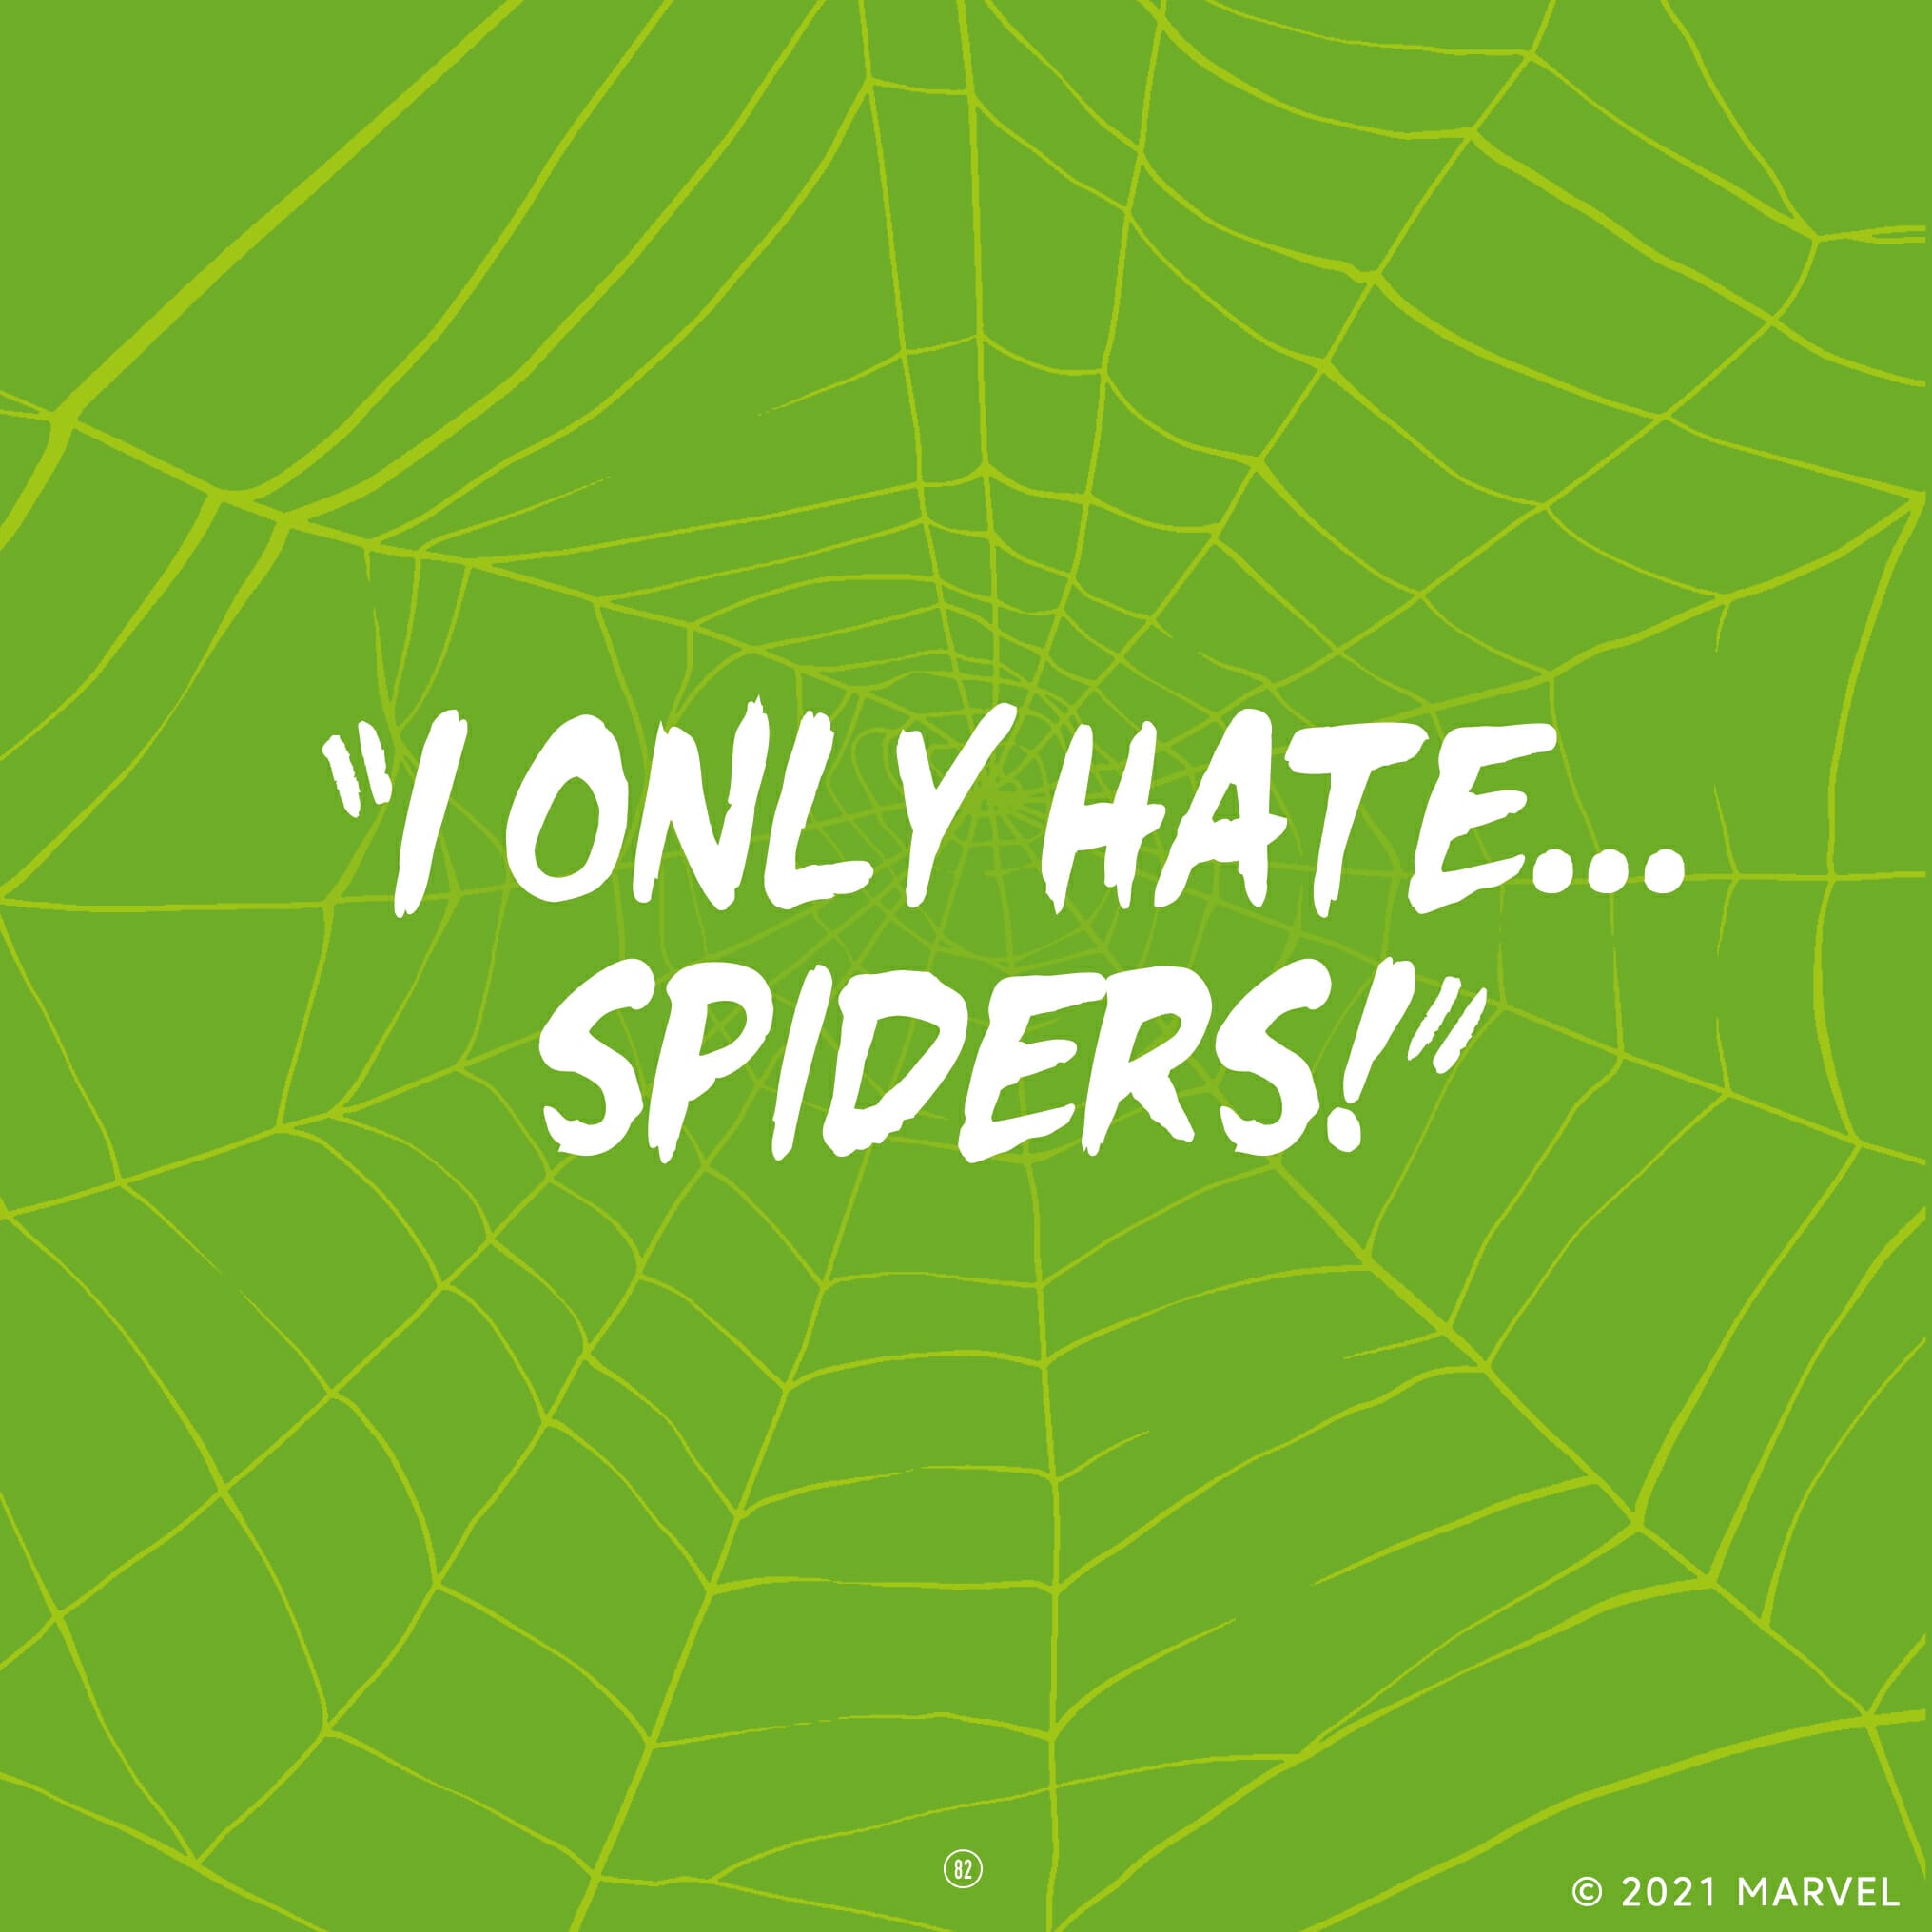 I only hate spiders!